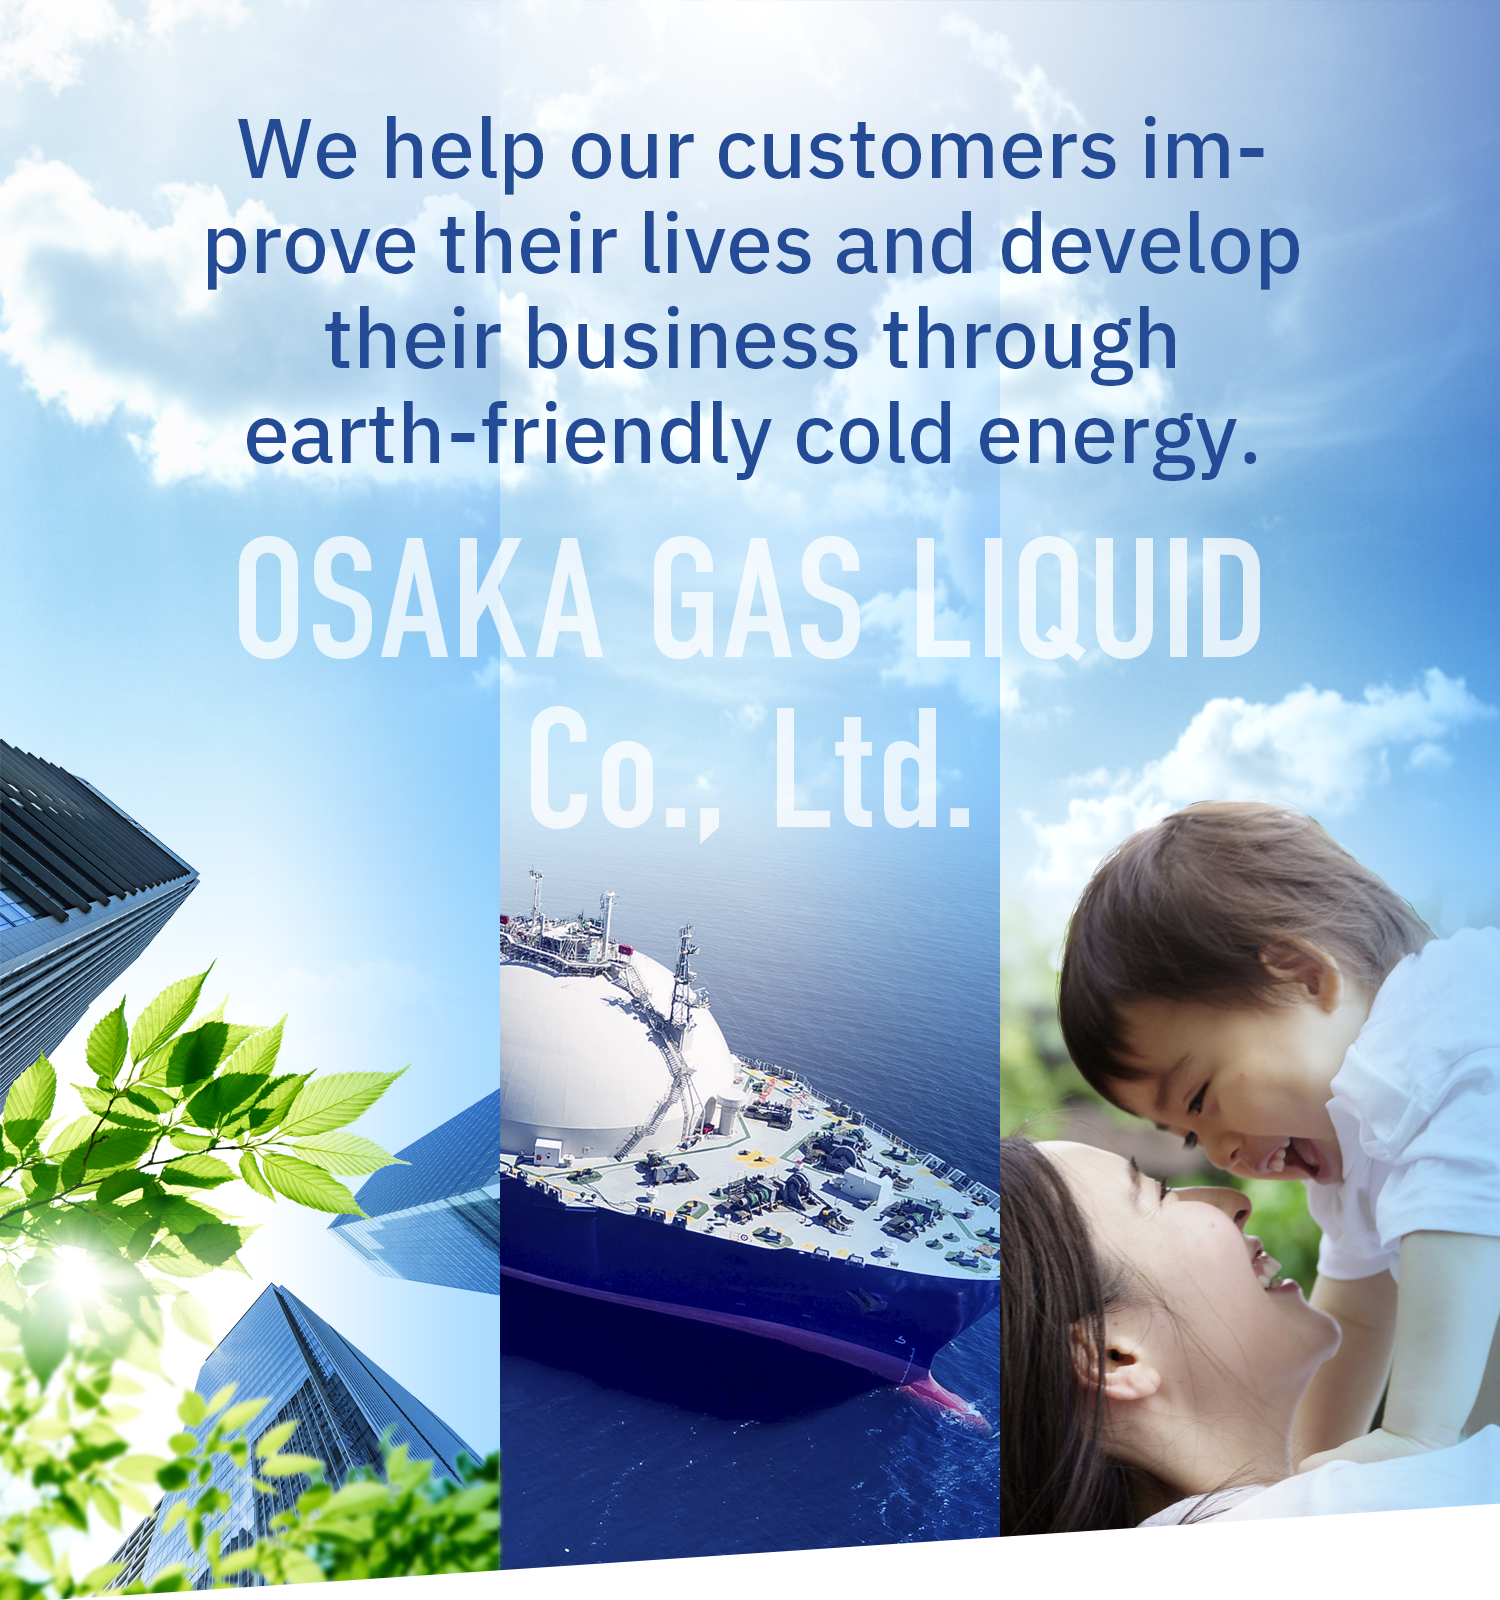 We help our customers improve their lives and develop their business through earth-friendly cold energy.